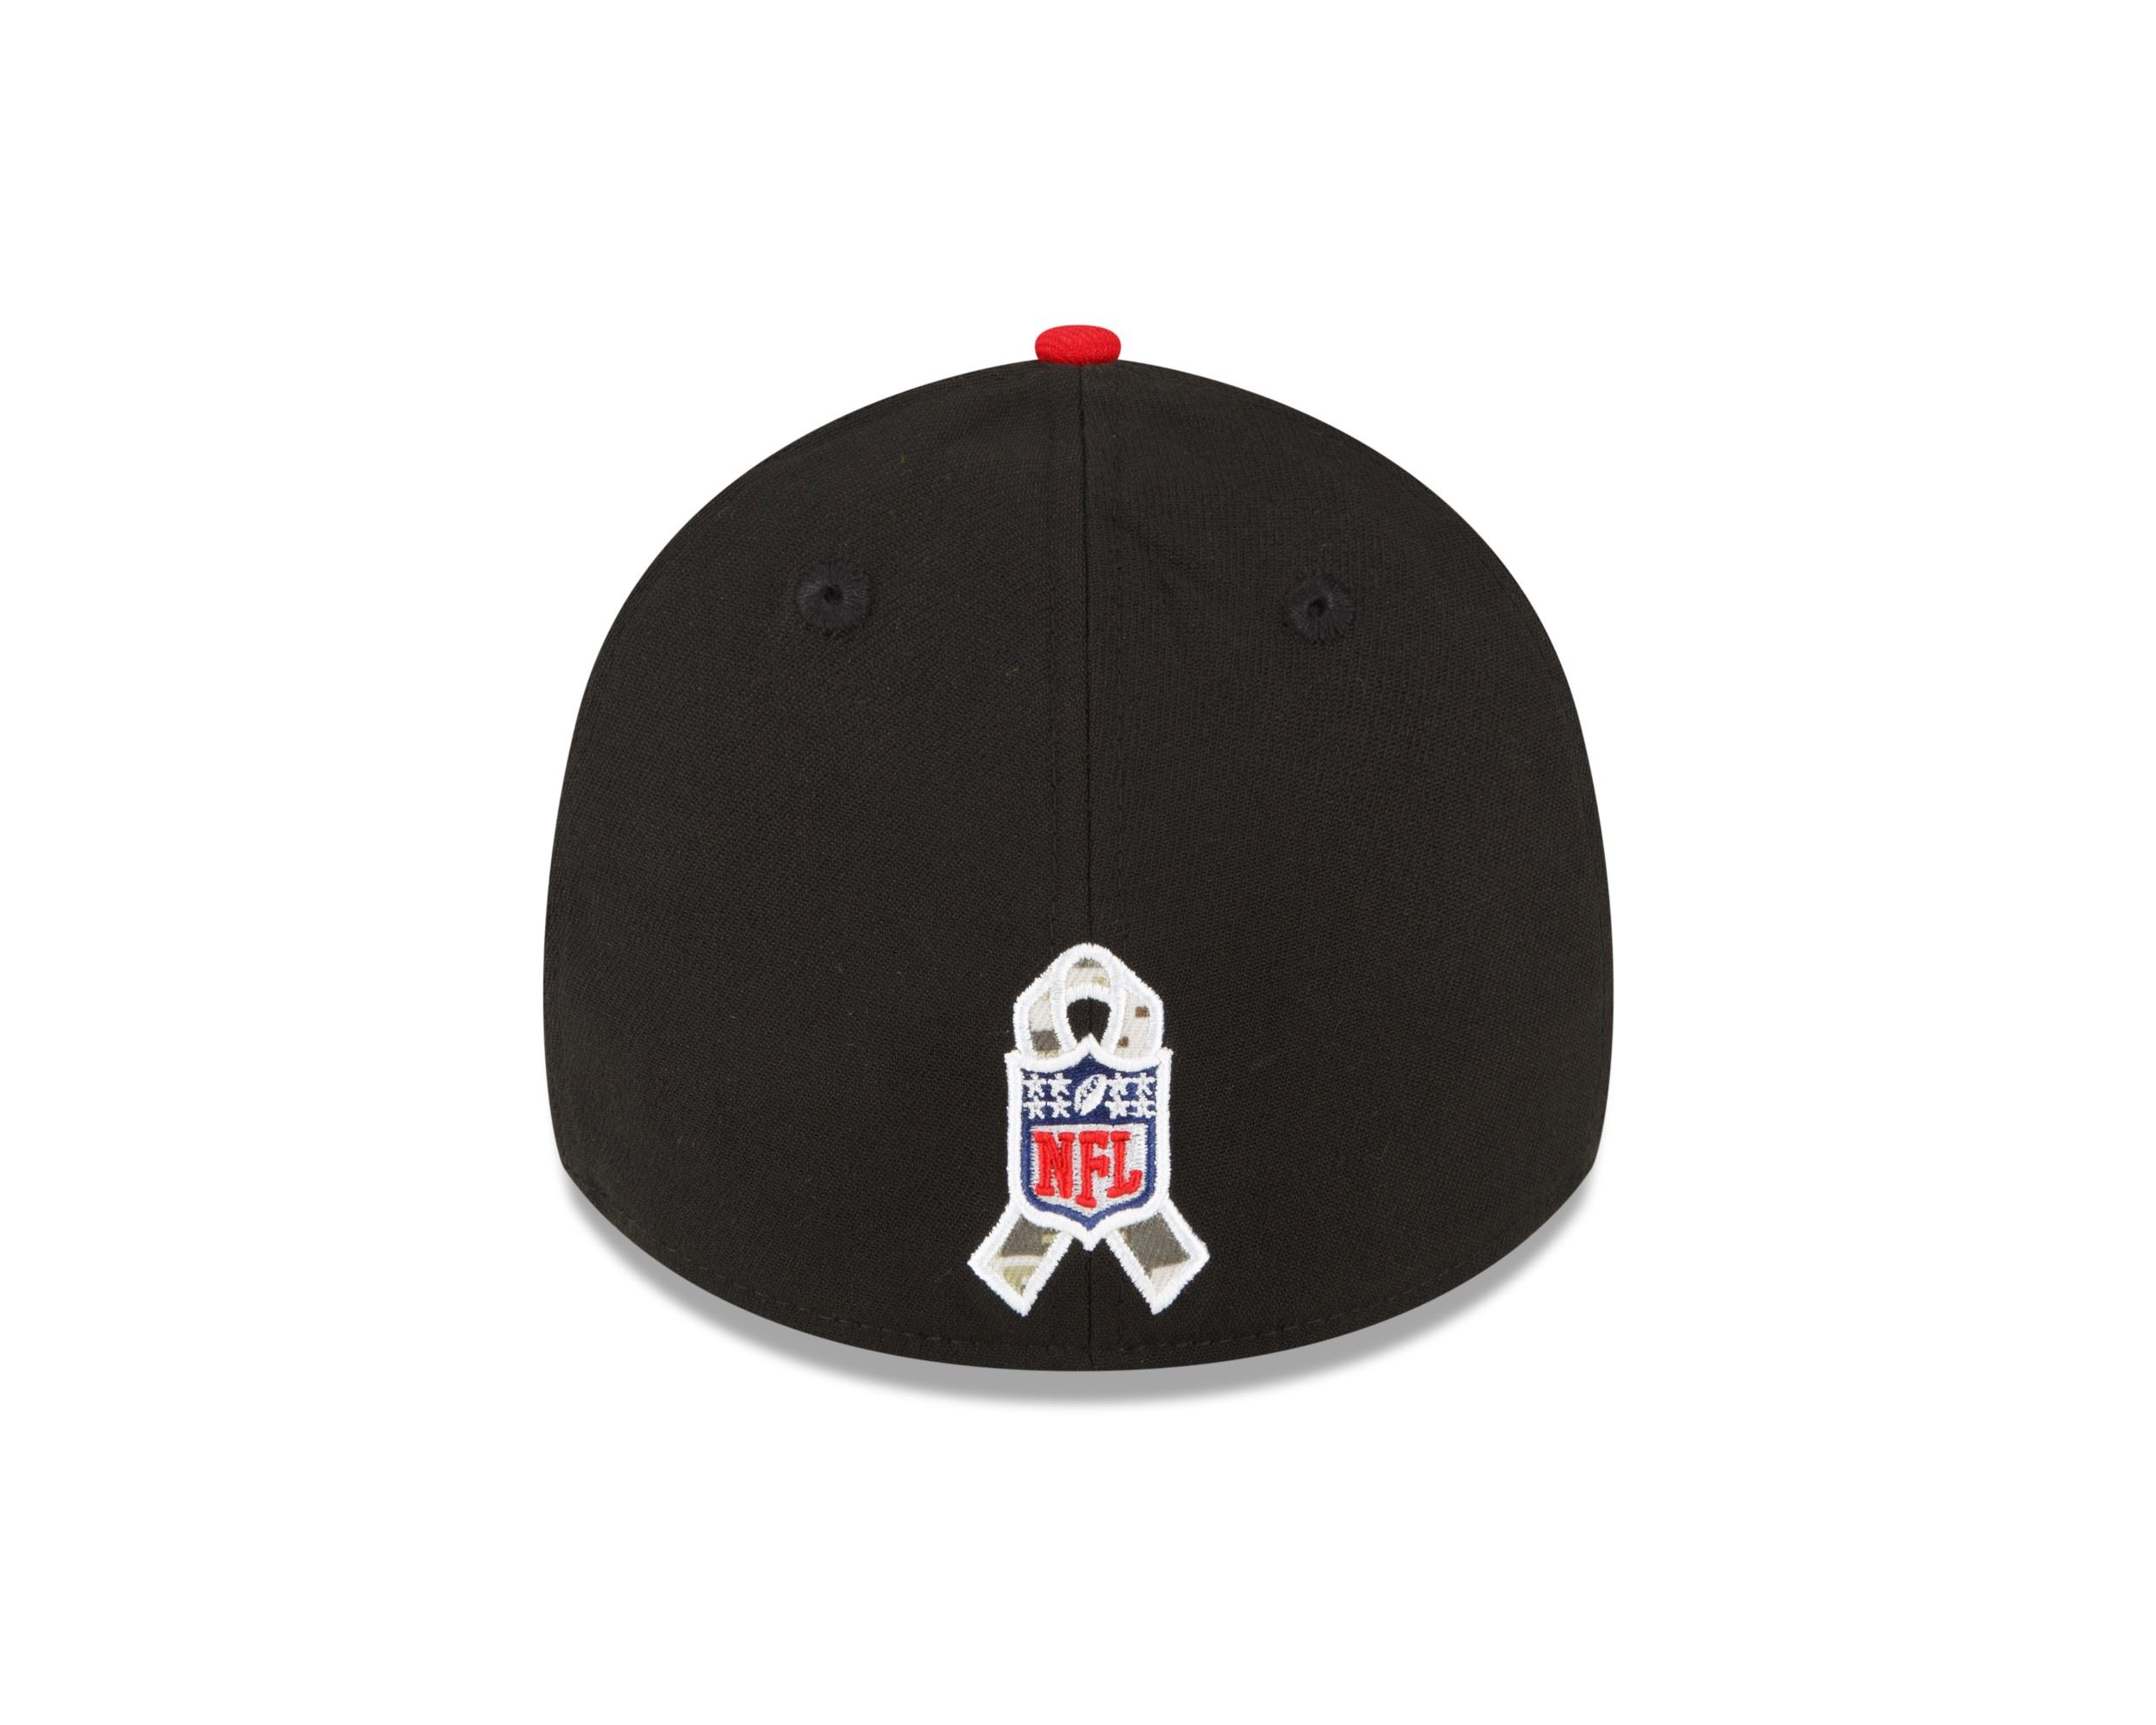 Tampa Bay Buccaneers NFL Salute to Service 2022 Black Red 39Thirty Stretch Cap New Era